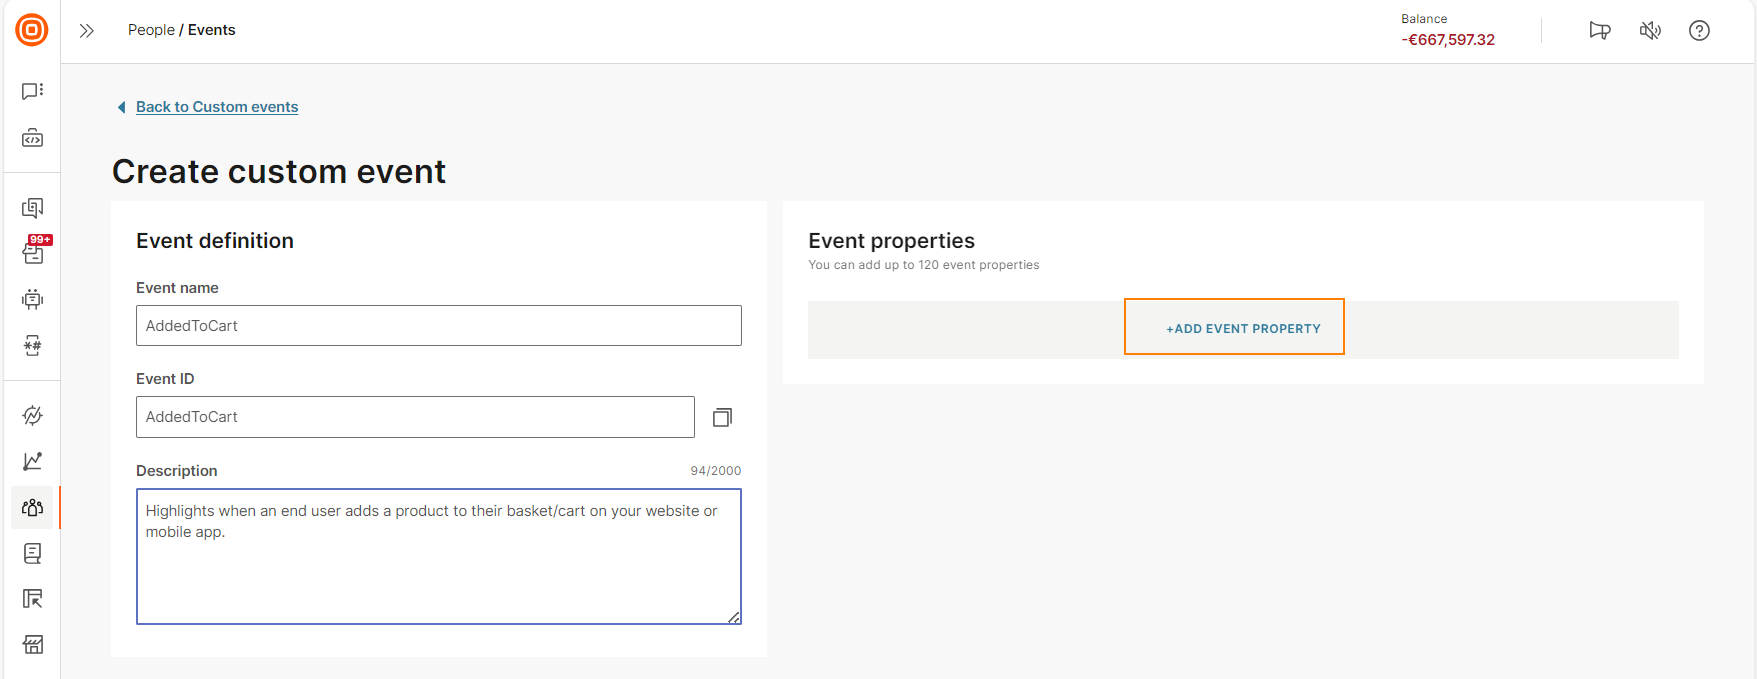 Add properties to an event